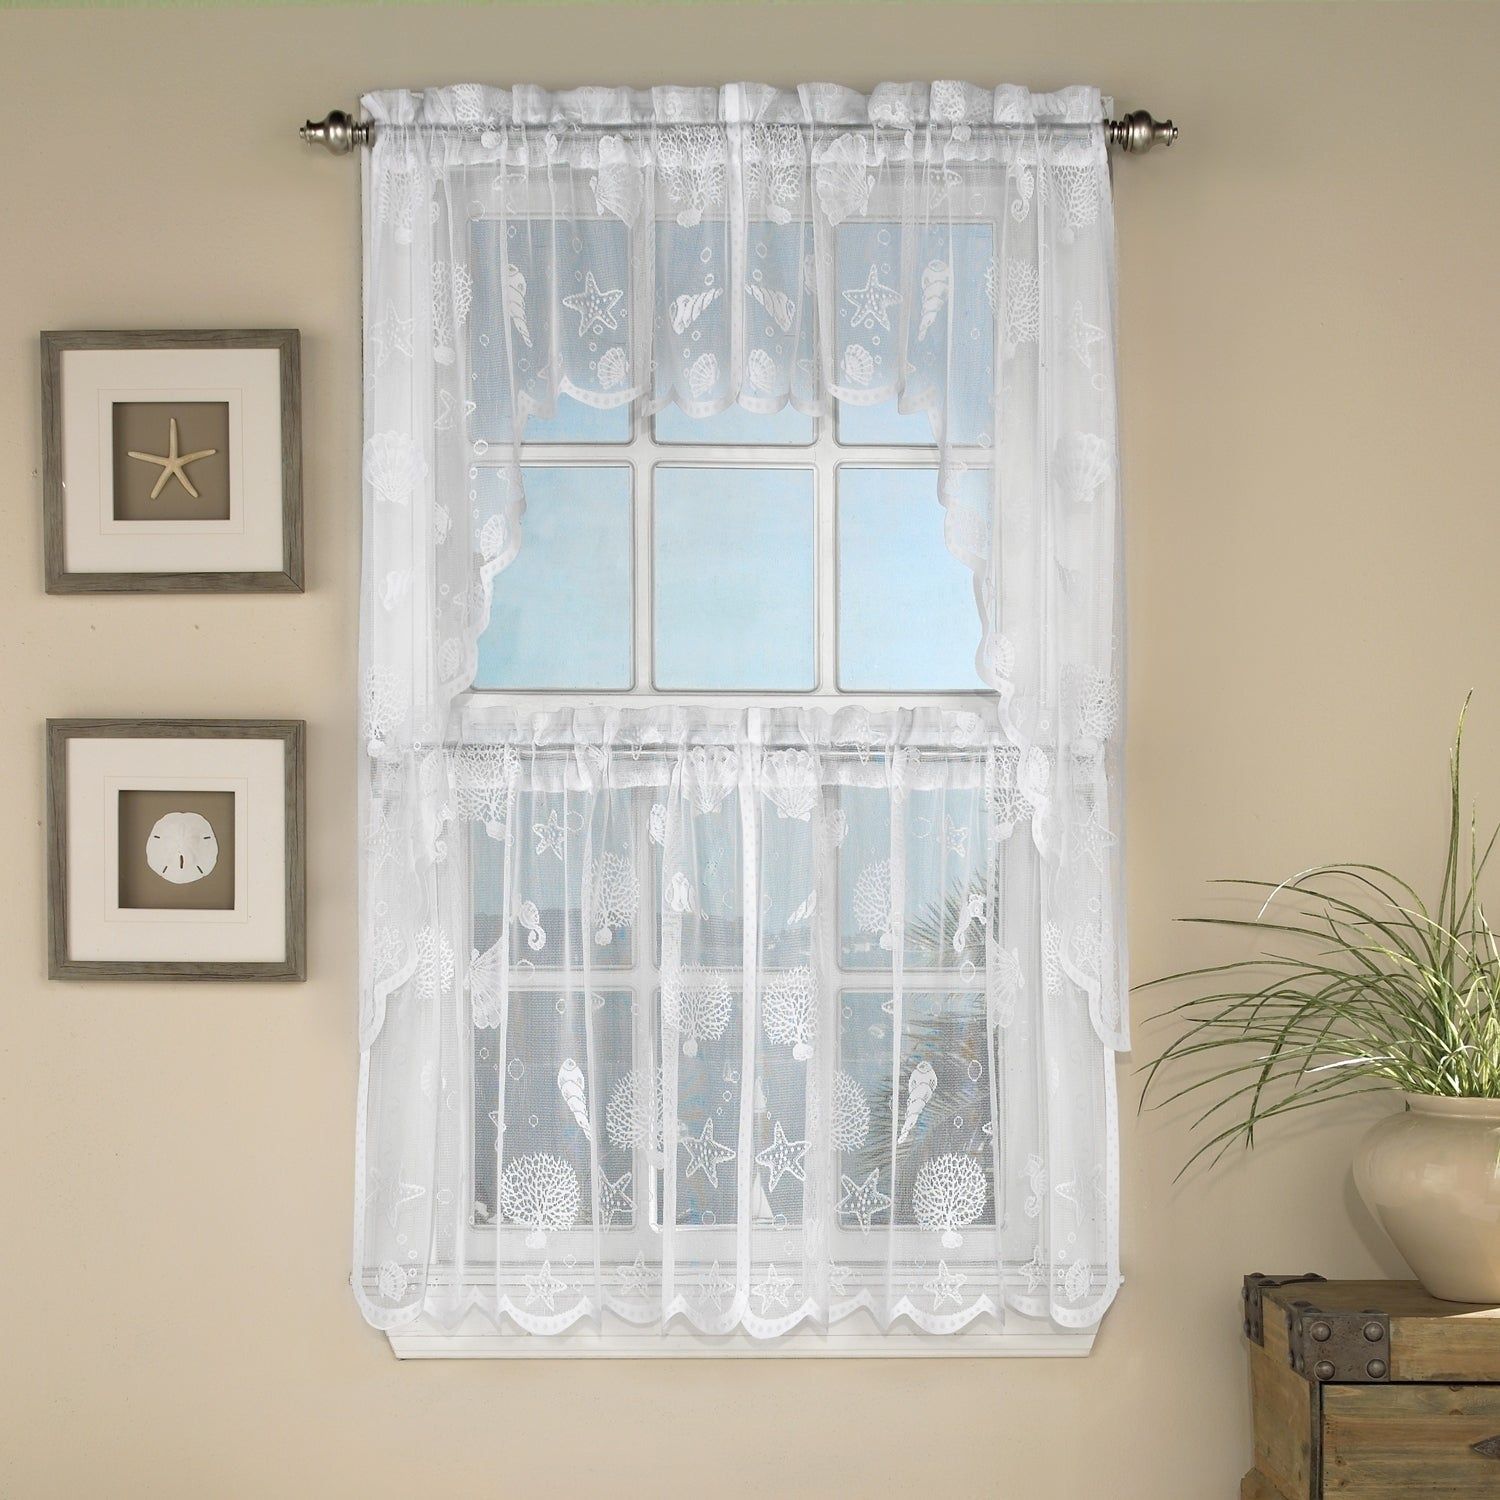 Marine Life Motif Knitted Lace Window Curtain Pieces Throughout White Knit Lace Bird Motif Window Curtain Tiers (Photo 5 of 20)